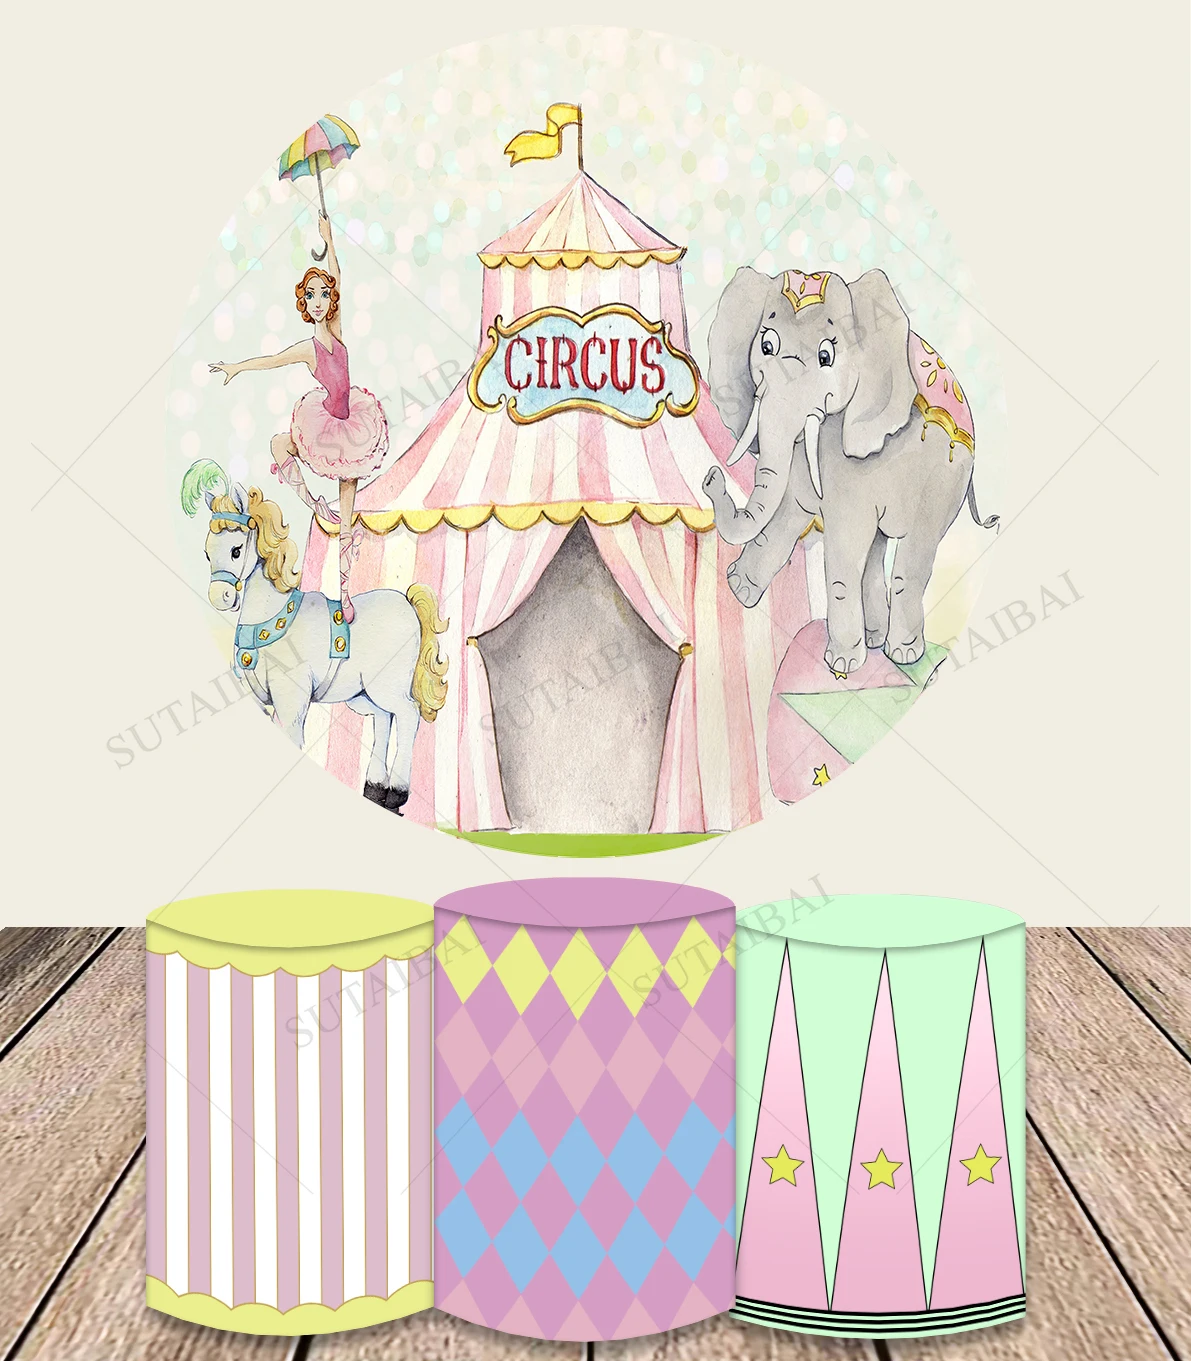 Circus Tent Poster Backdrop Carnival Decoration Props Family Portrait Photocall Happy Sweet Photography Vinyl Cloth Photo Studio